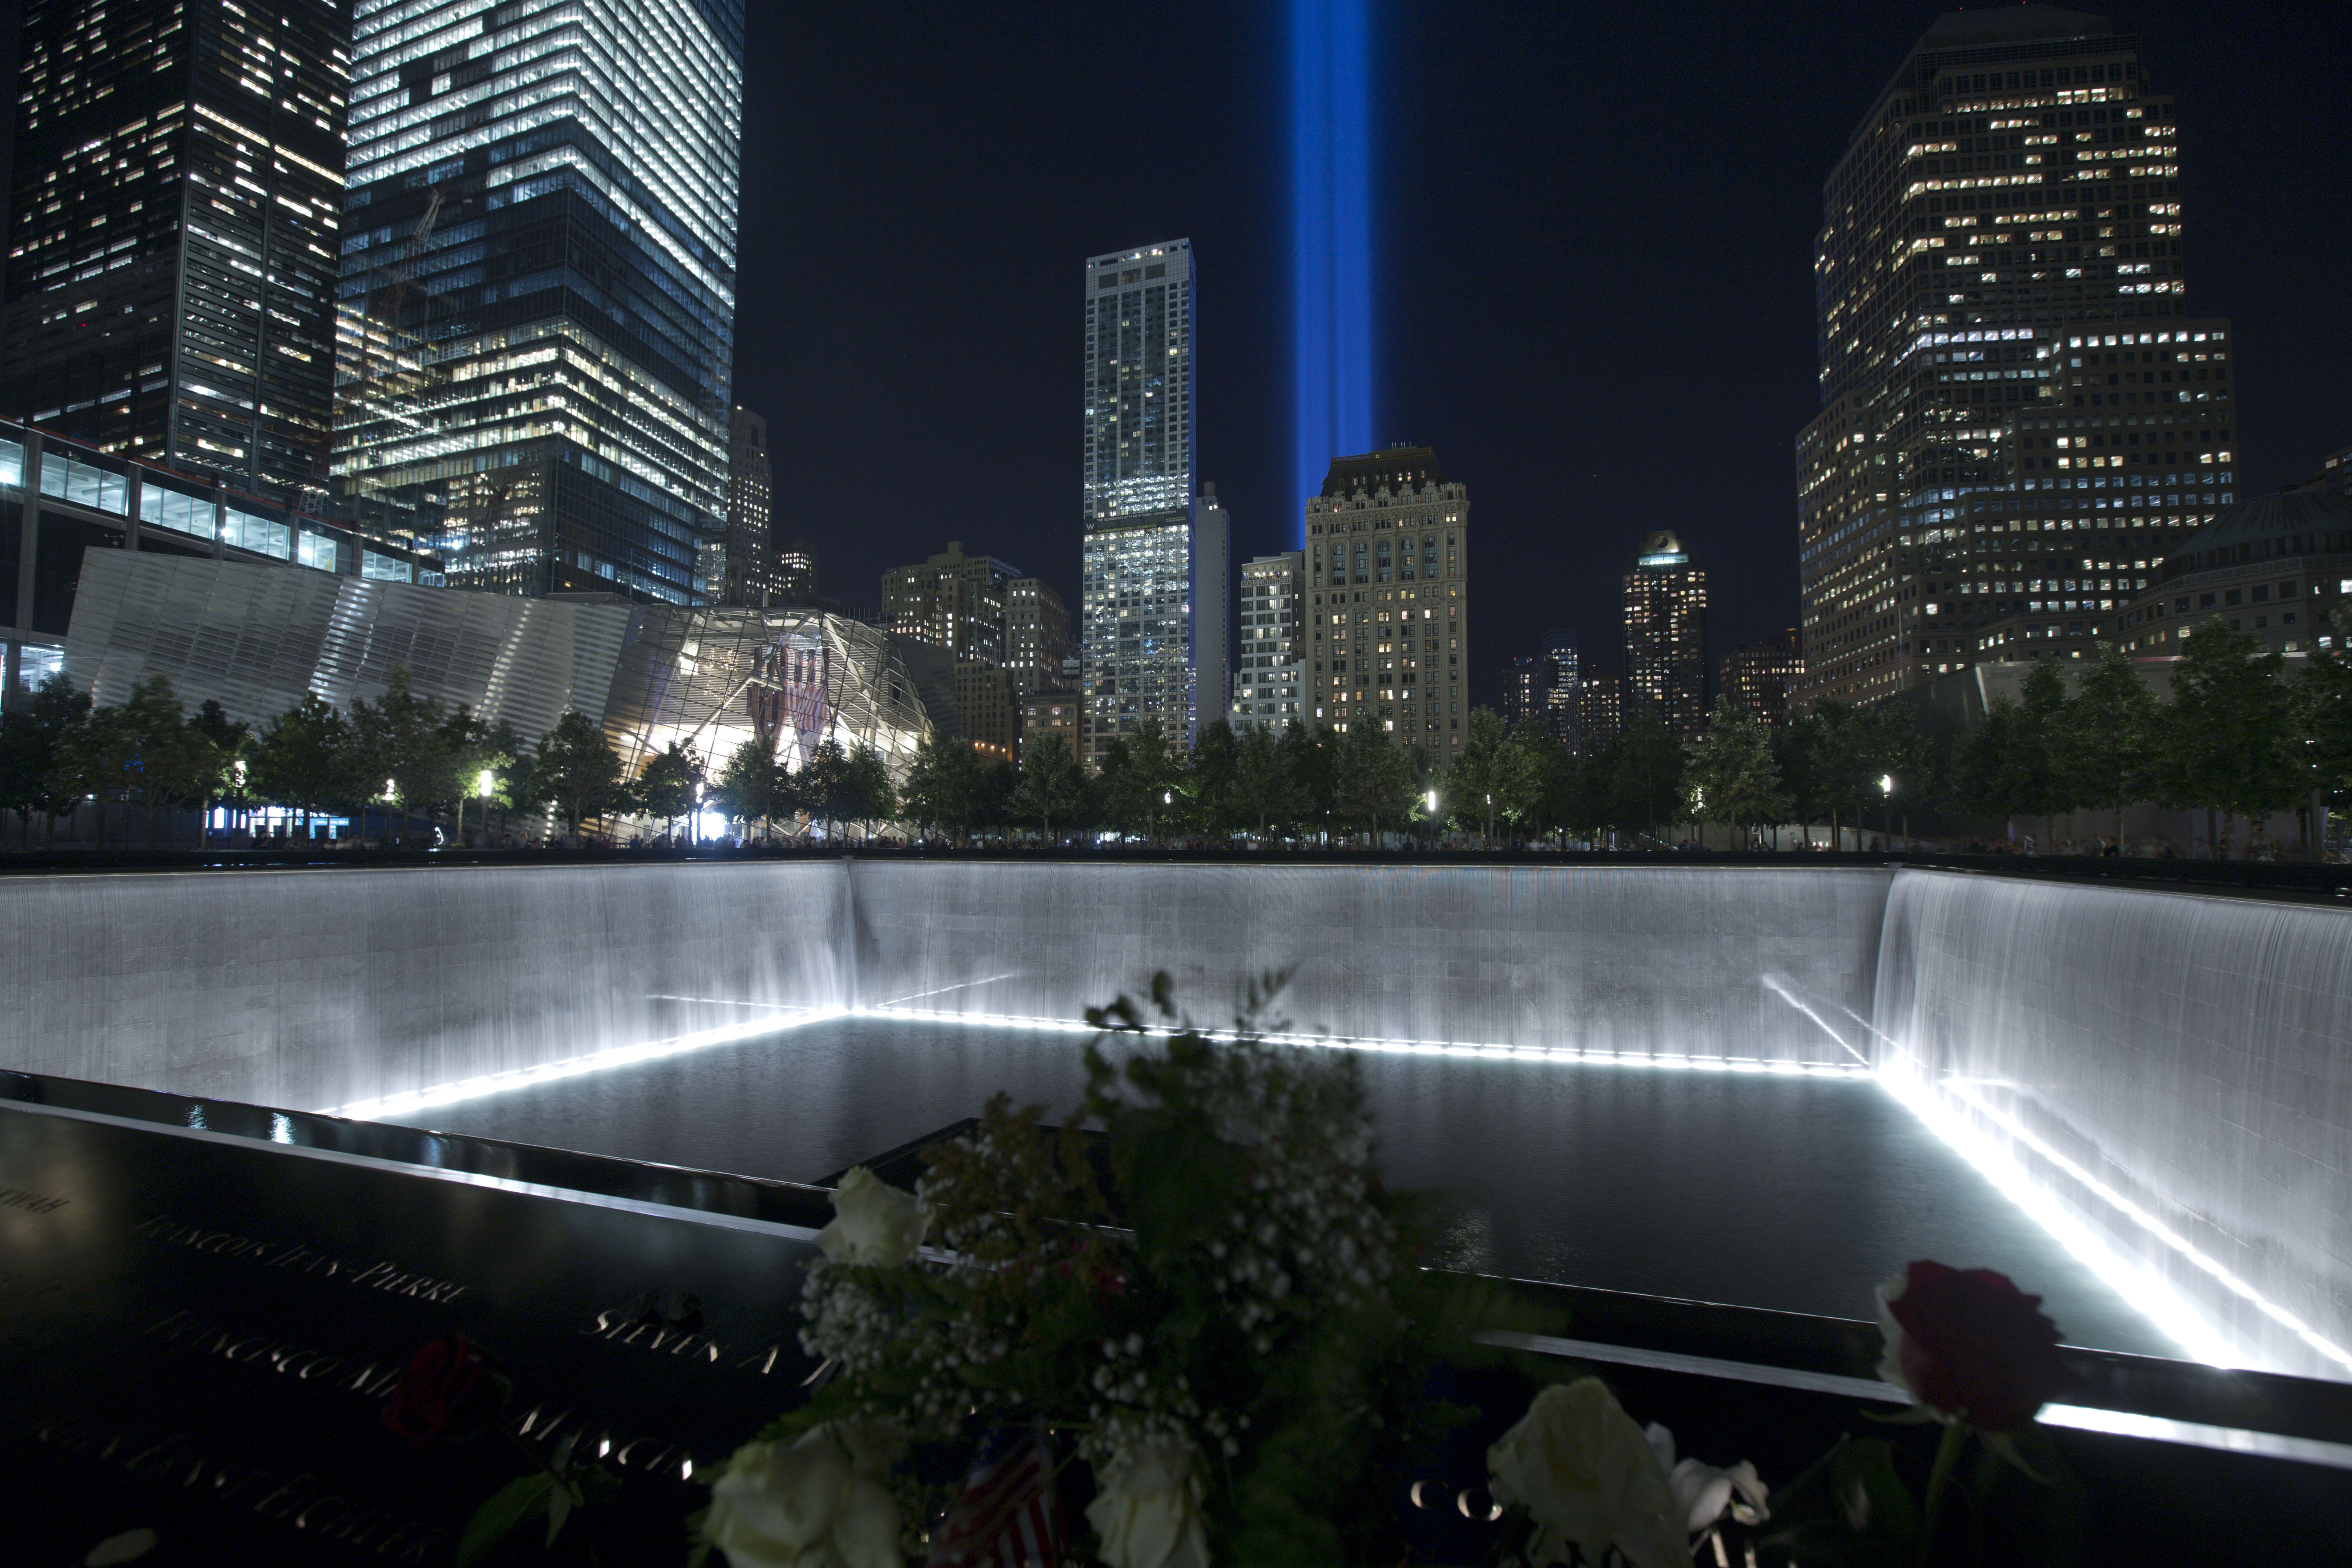 The Tribute in Light shines over the 9/11 Memorial plaza as water cascades down the north reflecting pool. Flowers placed at names on the Memorial’s bronze parapets are in the foreground.